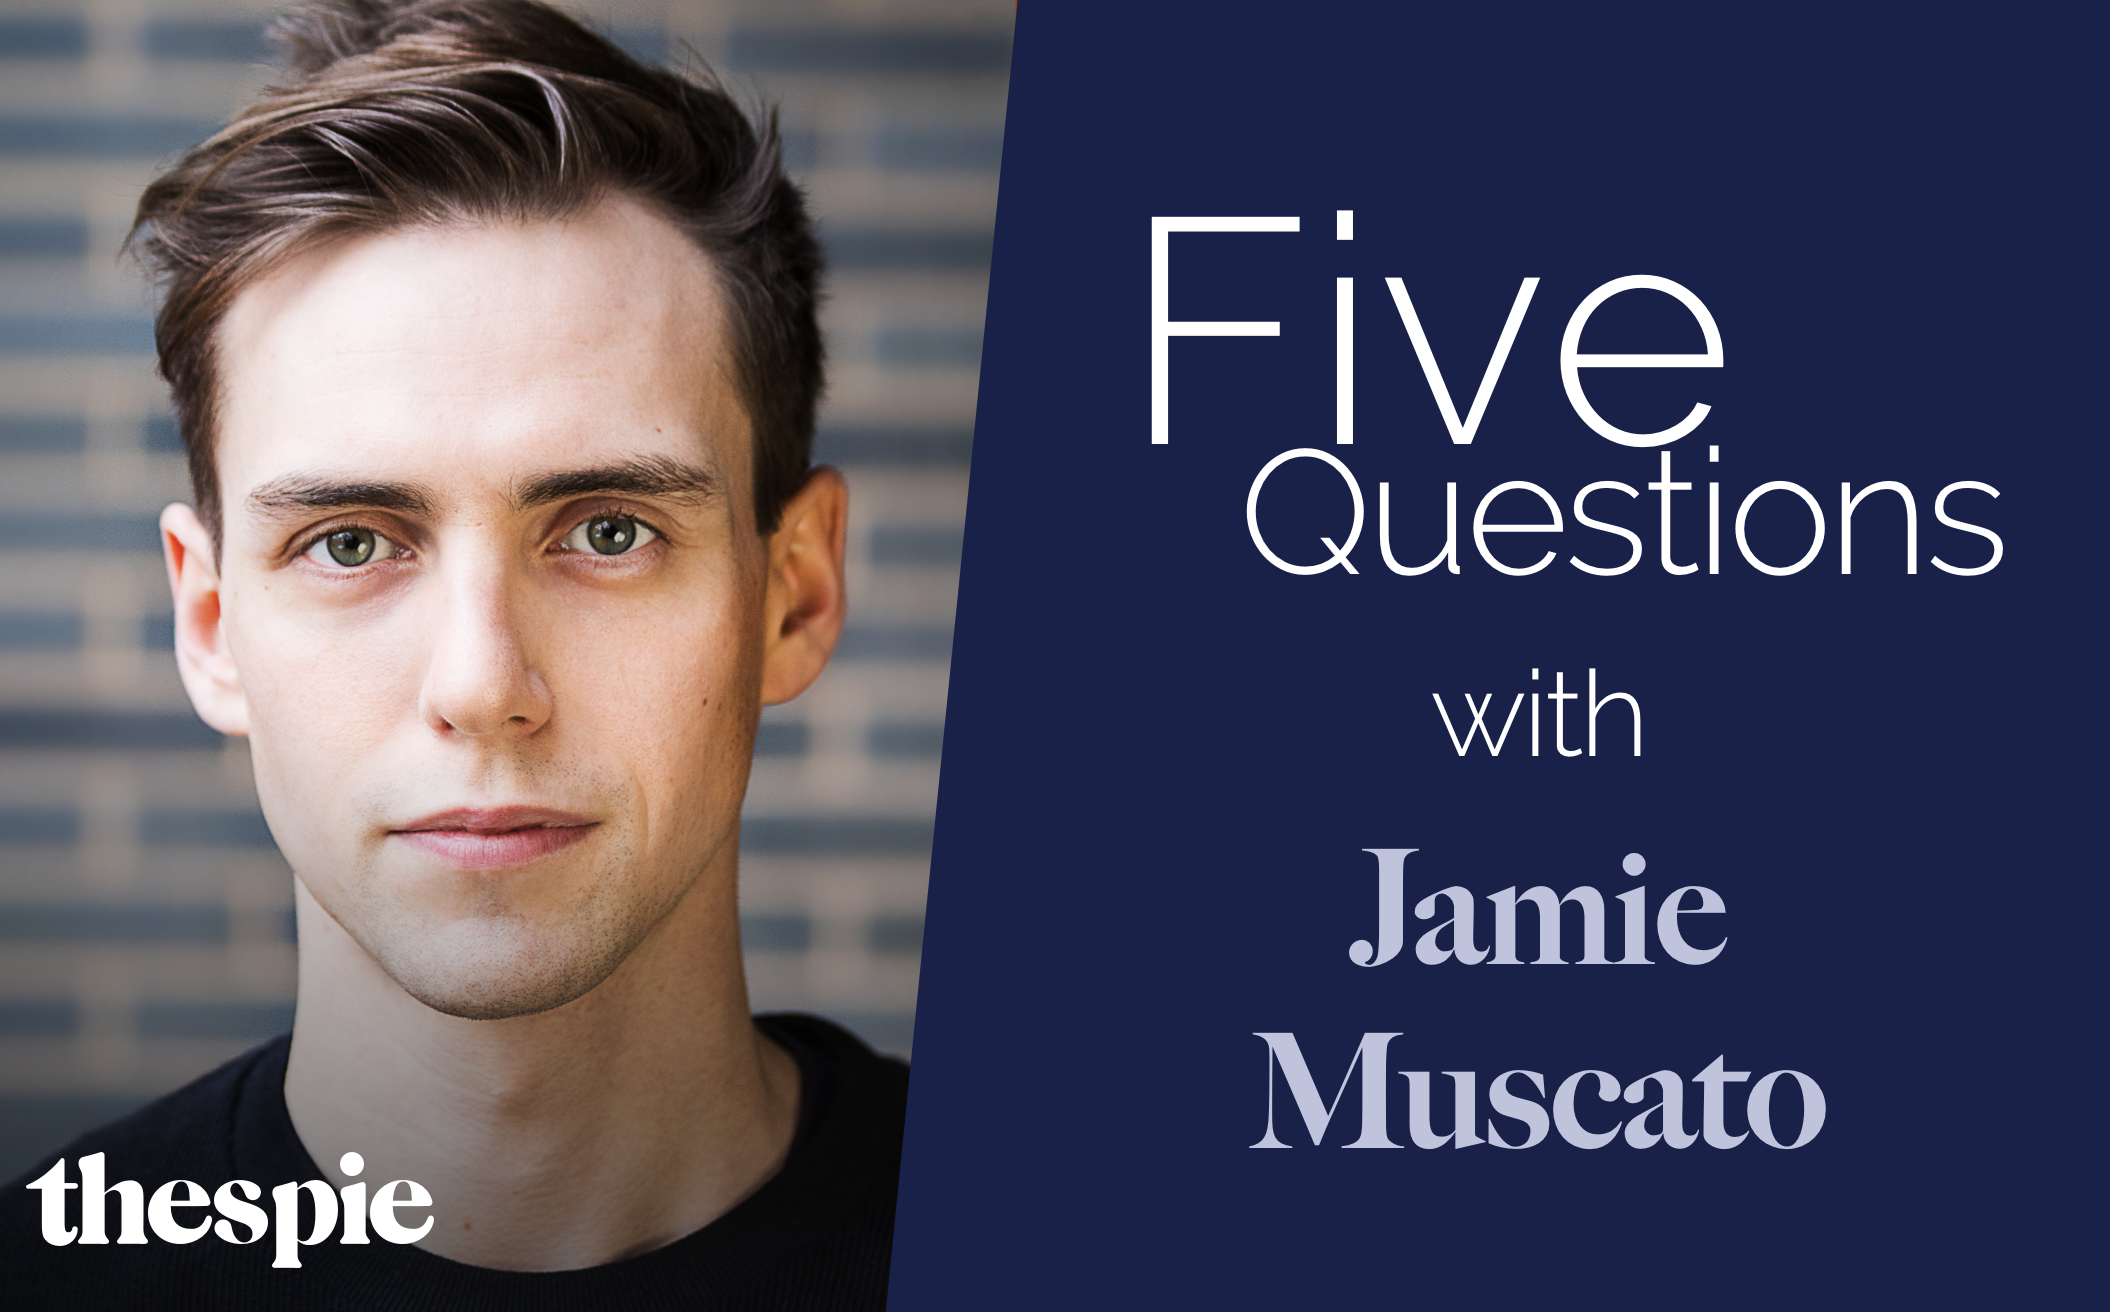 5 questions with Jamie Muscato